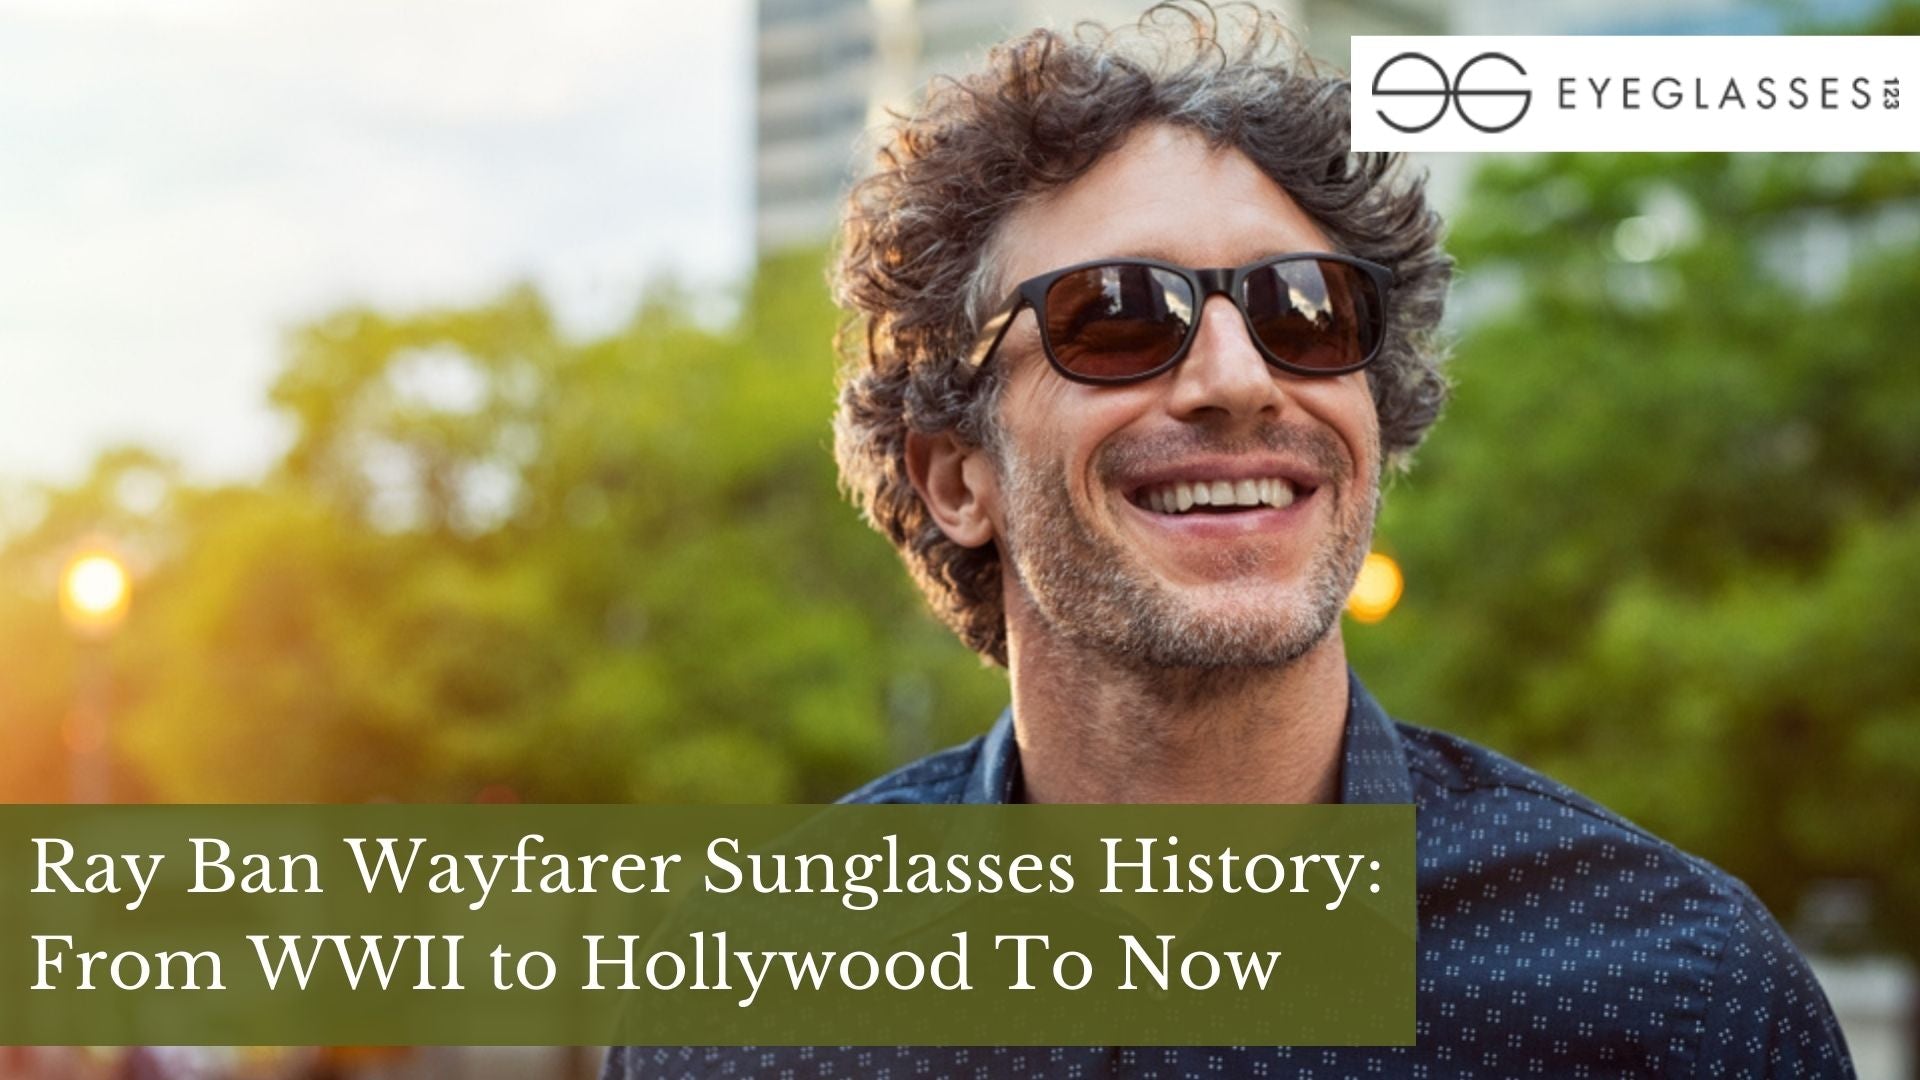 Ray Ban Wayfarer Sunglasses History: From WWII to Hollywood To Now